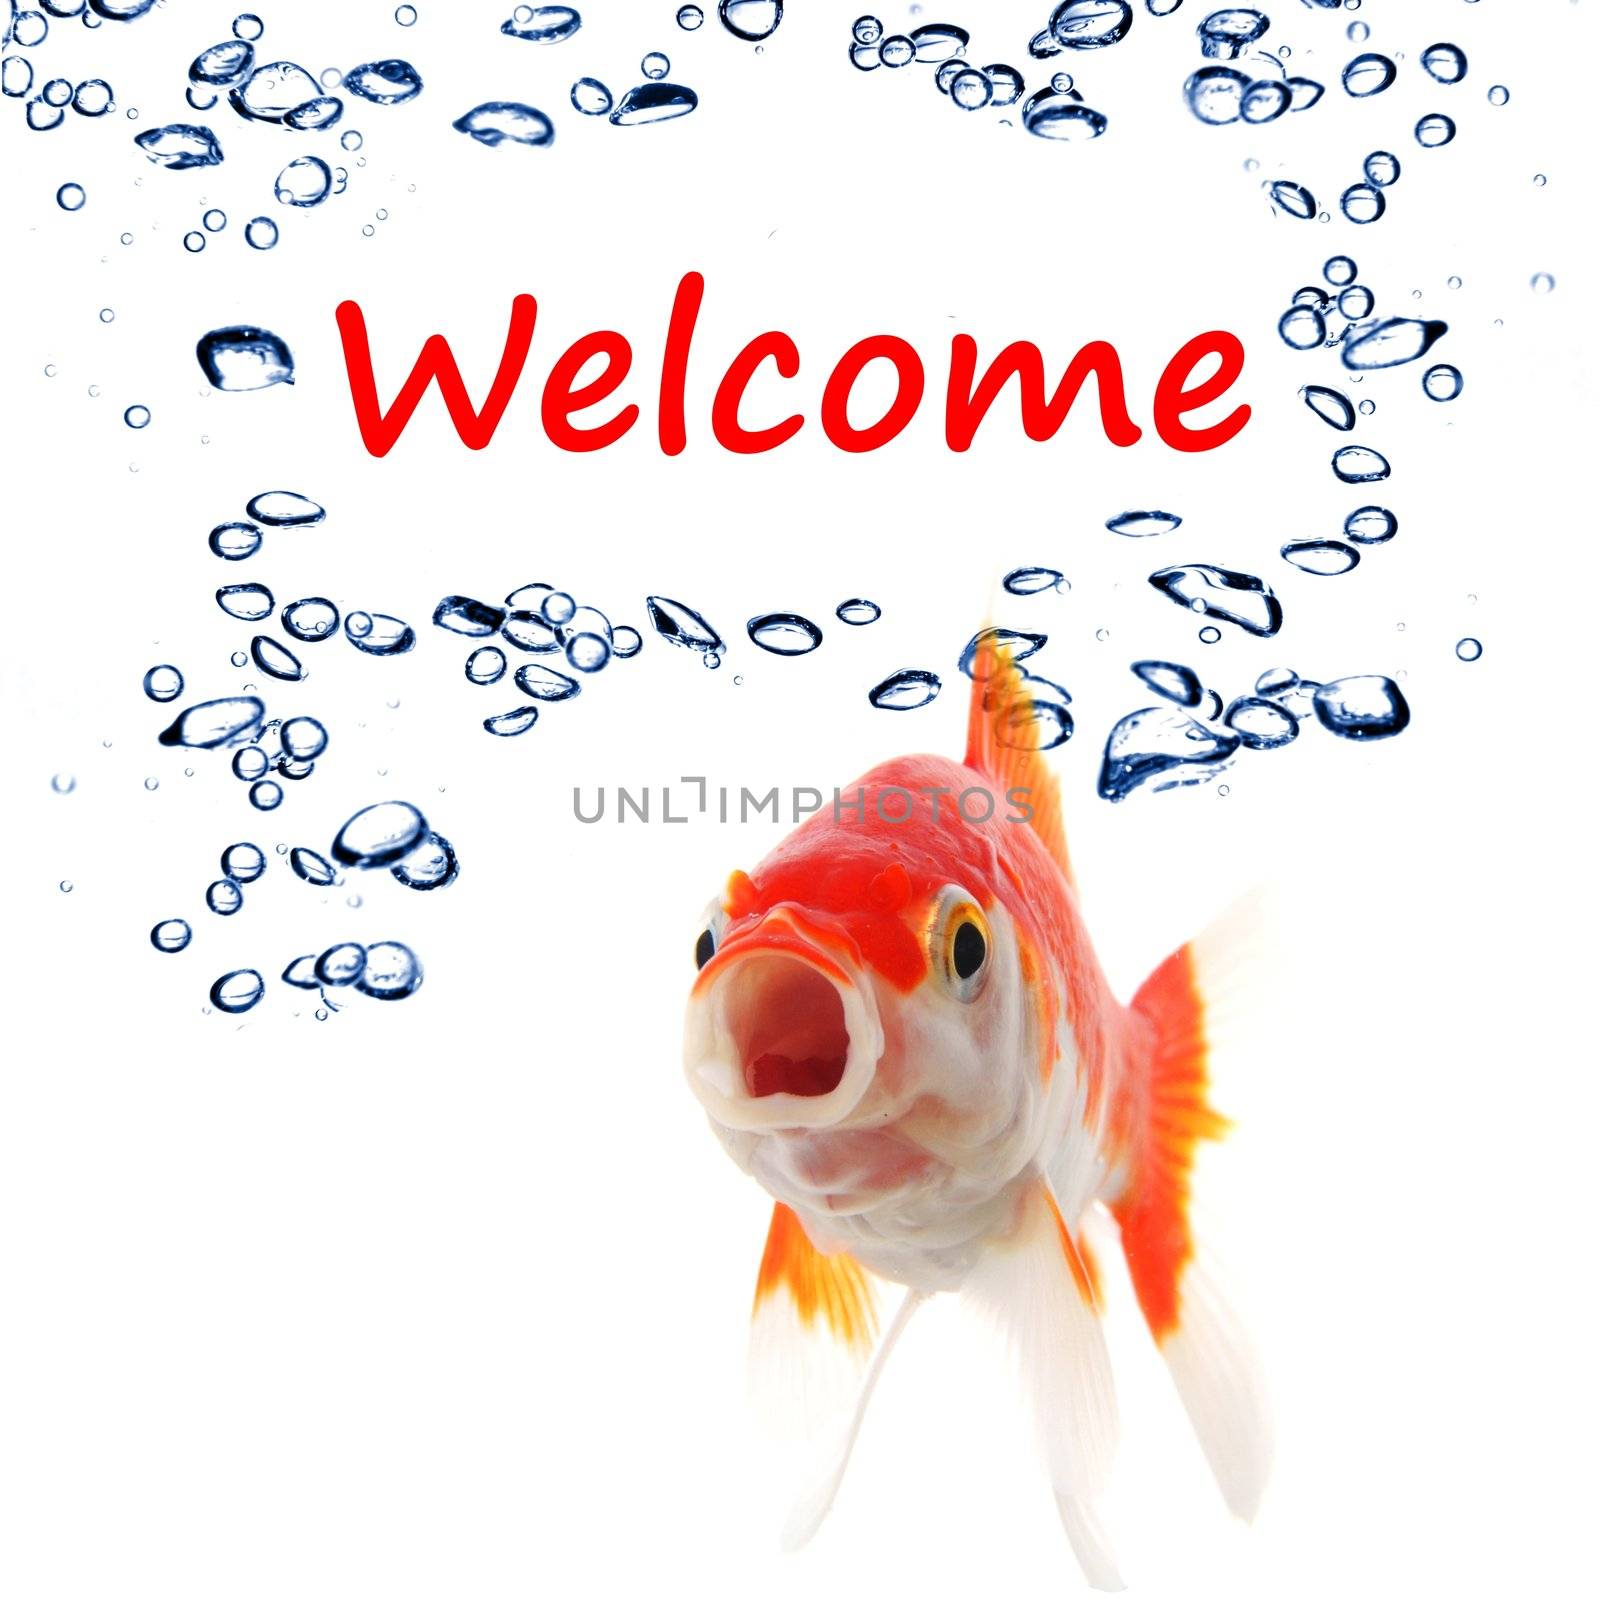 welcome concept with word and goldfish on white